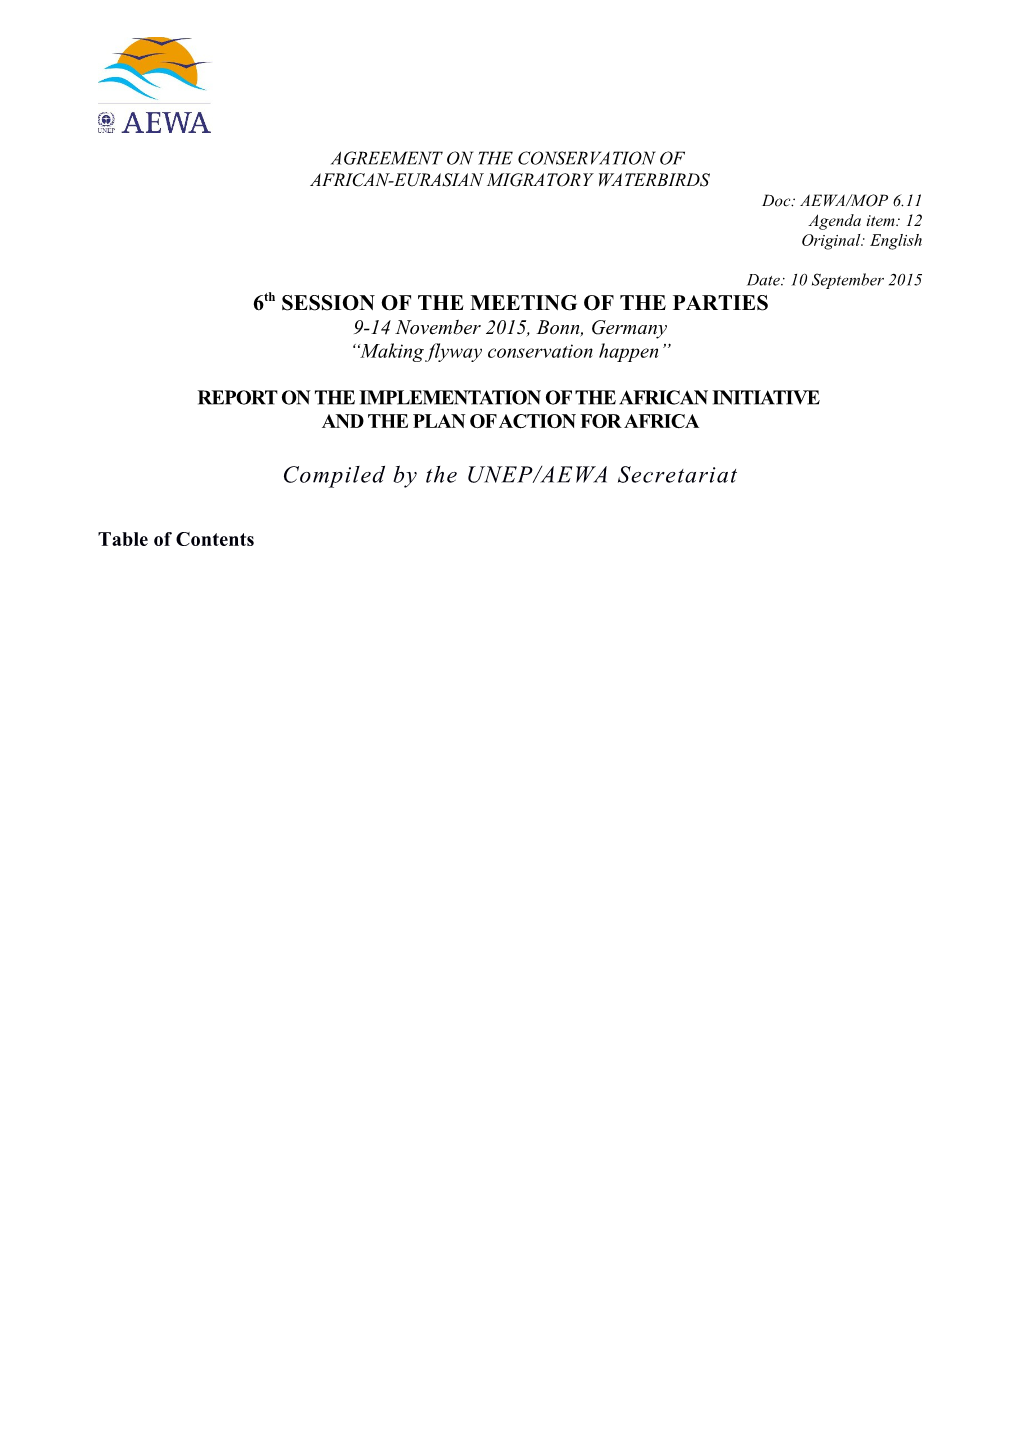 Report on the Implementation of the African Initiative